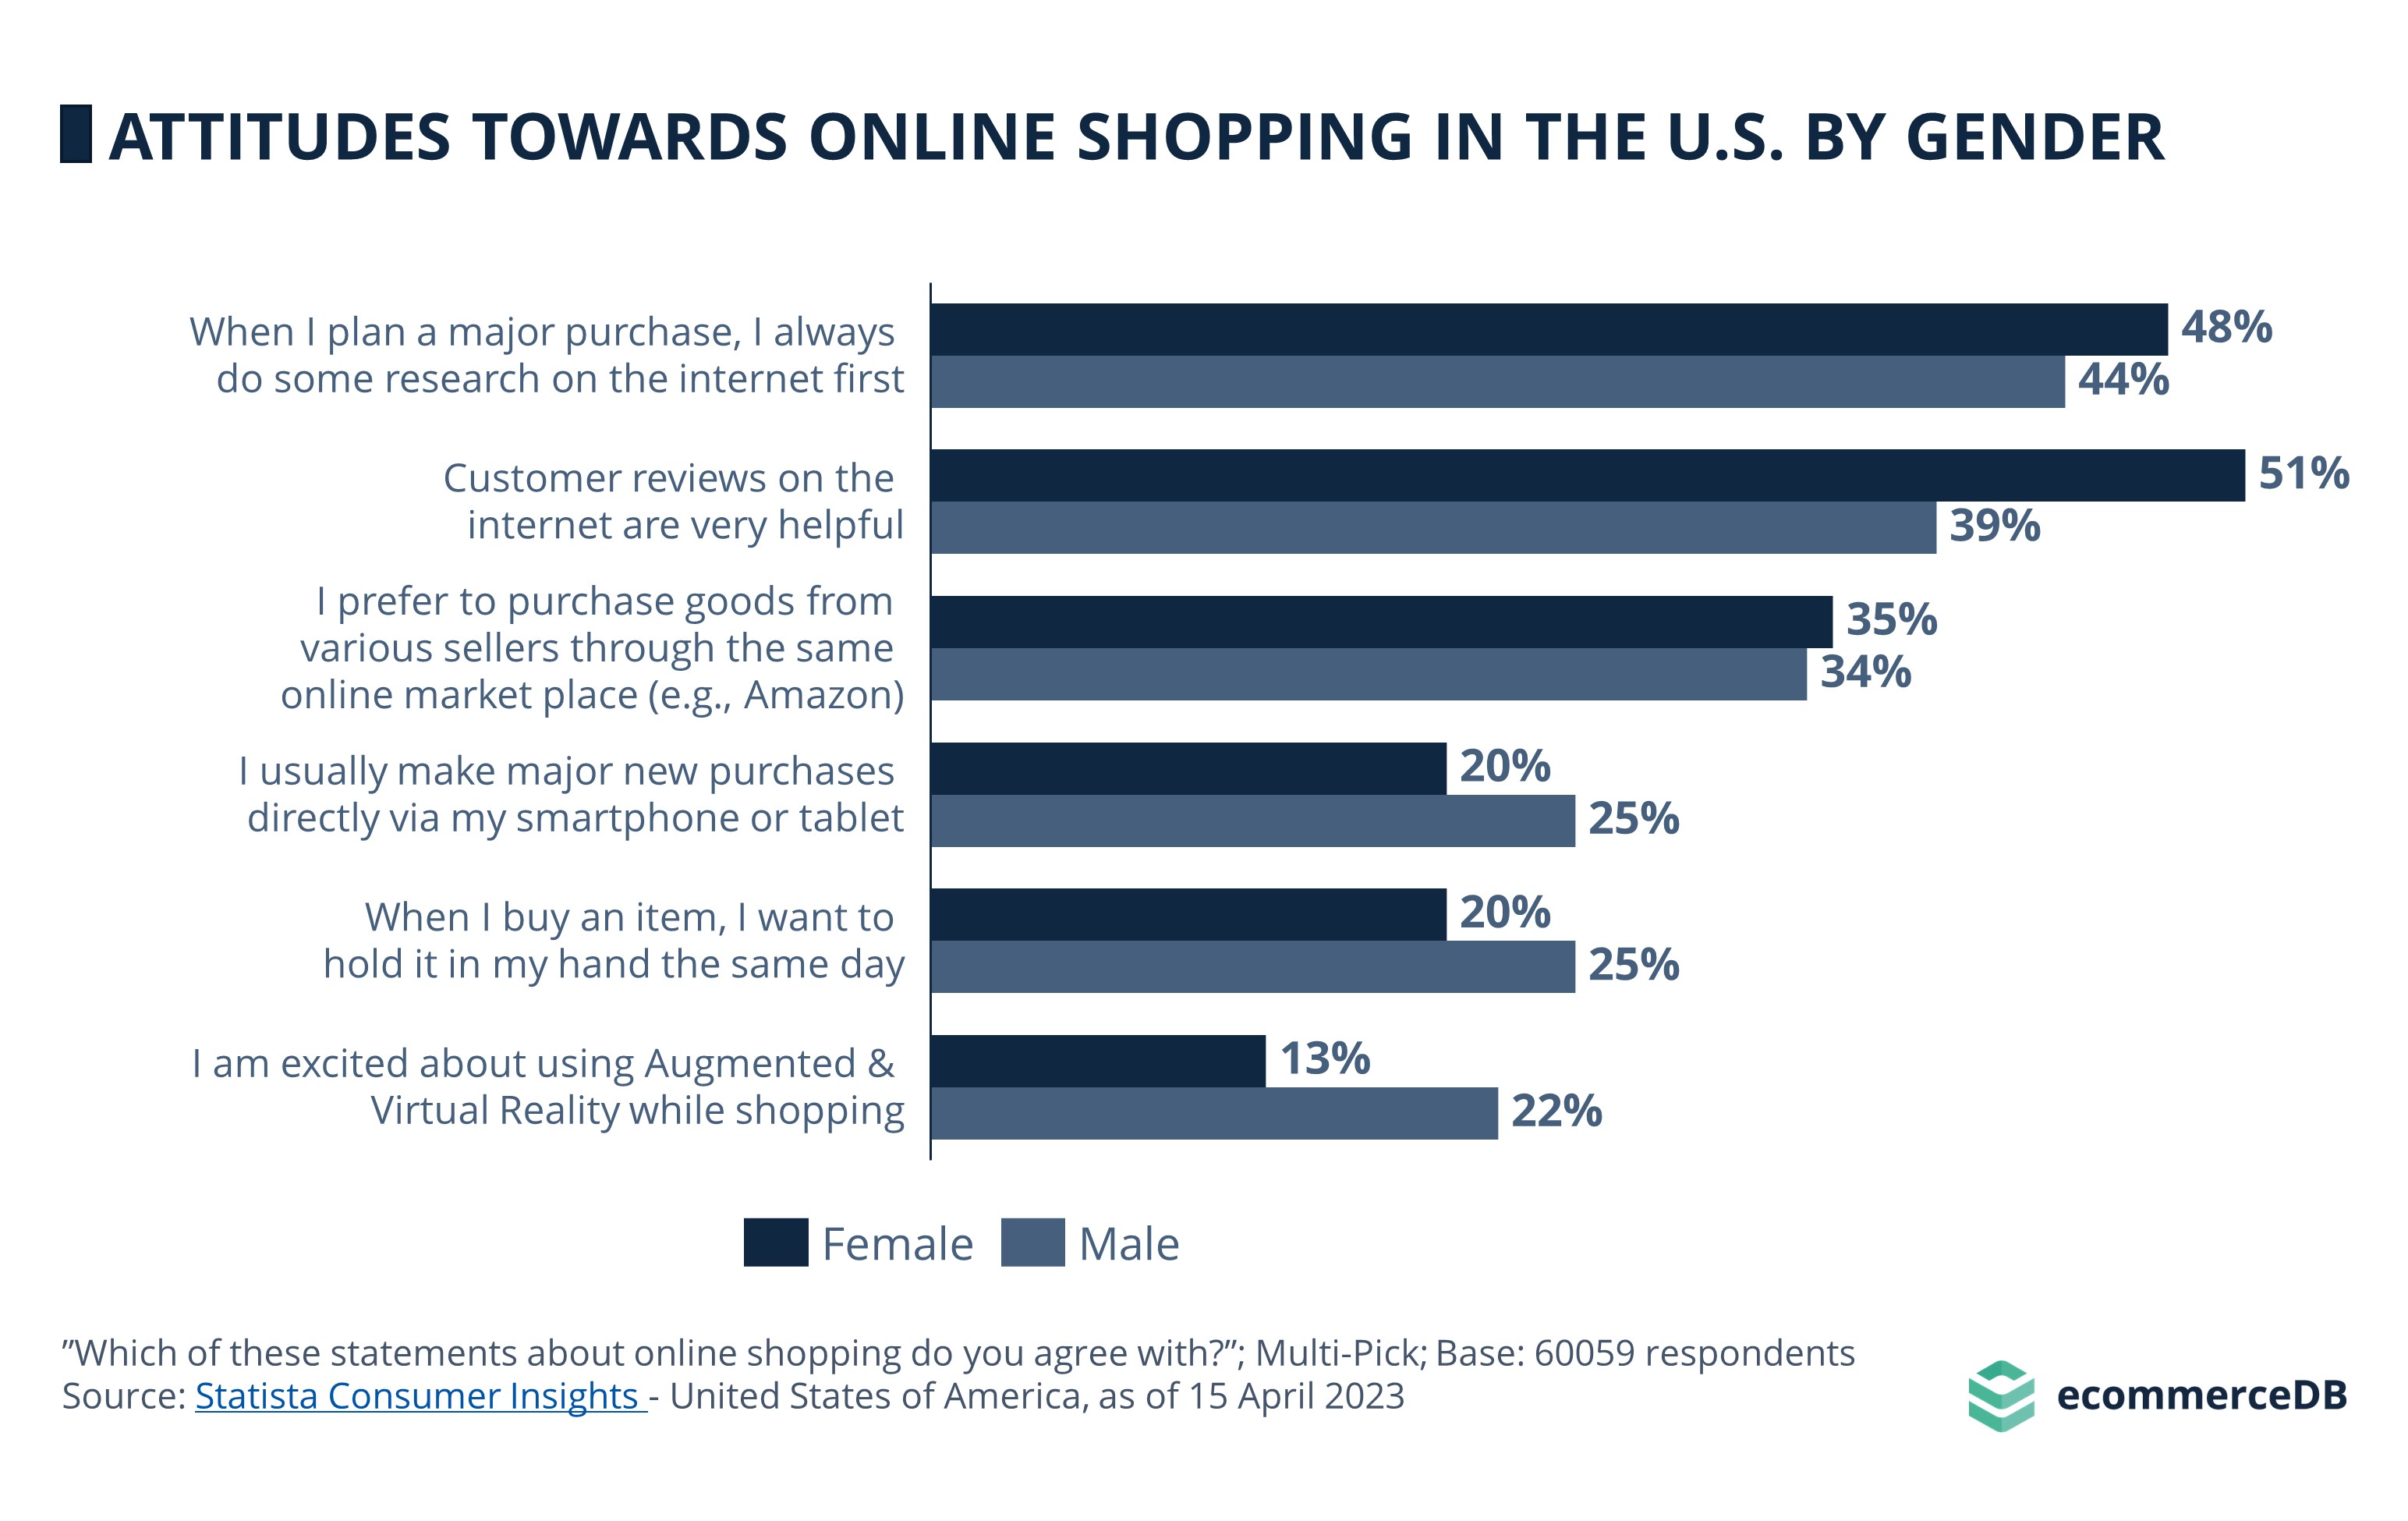 Attitude towards online shopping in the U.S. by Gender